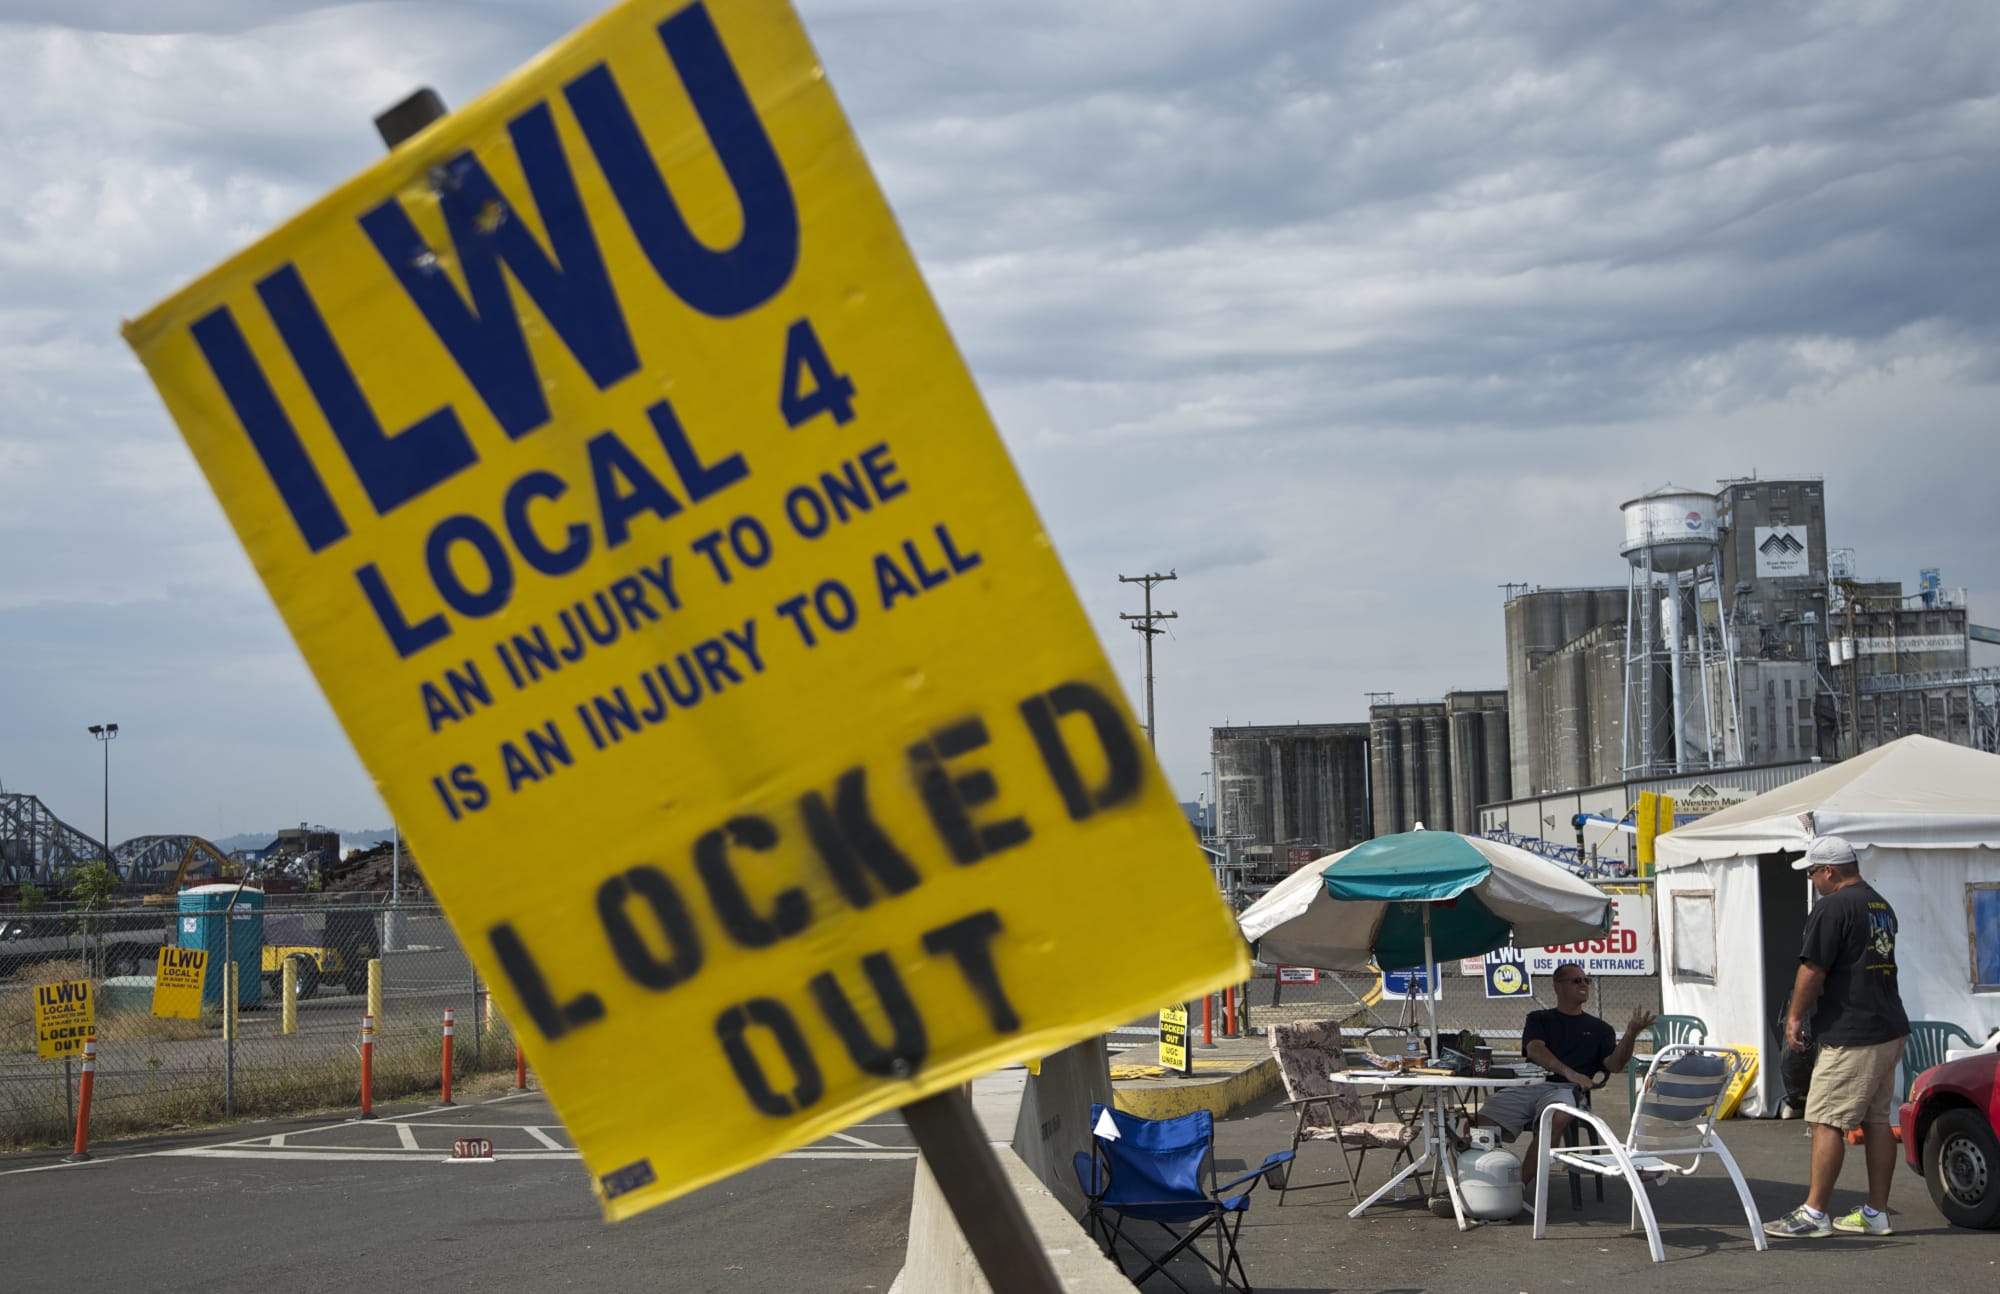 ILWU Local 4 members remain outside the United Grain terminal, on Tuesday August 12, 2014, after word of a tentative agreement has surfaced.